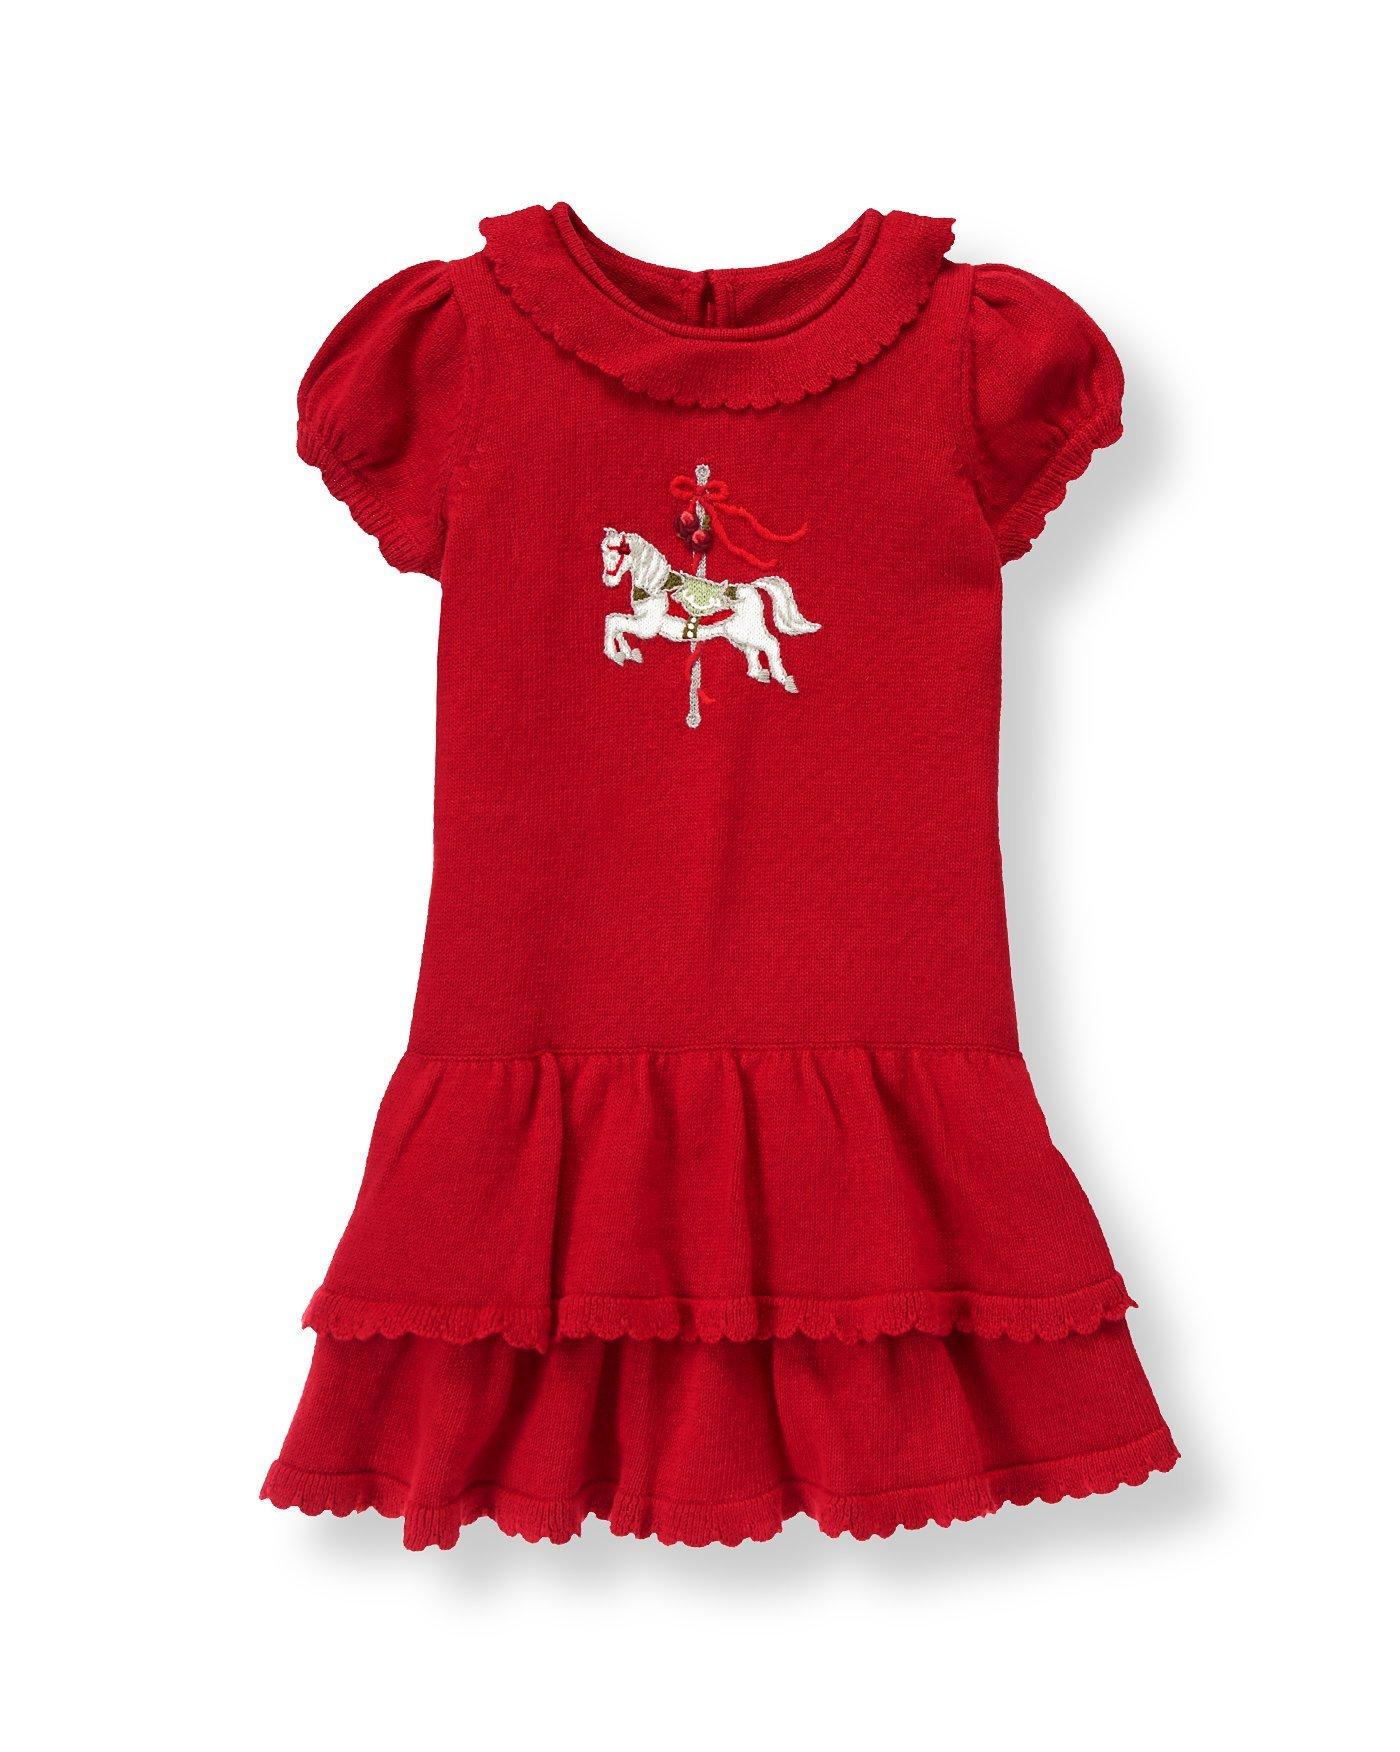 Carousel Horse Sweater Dress image number 0